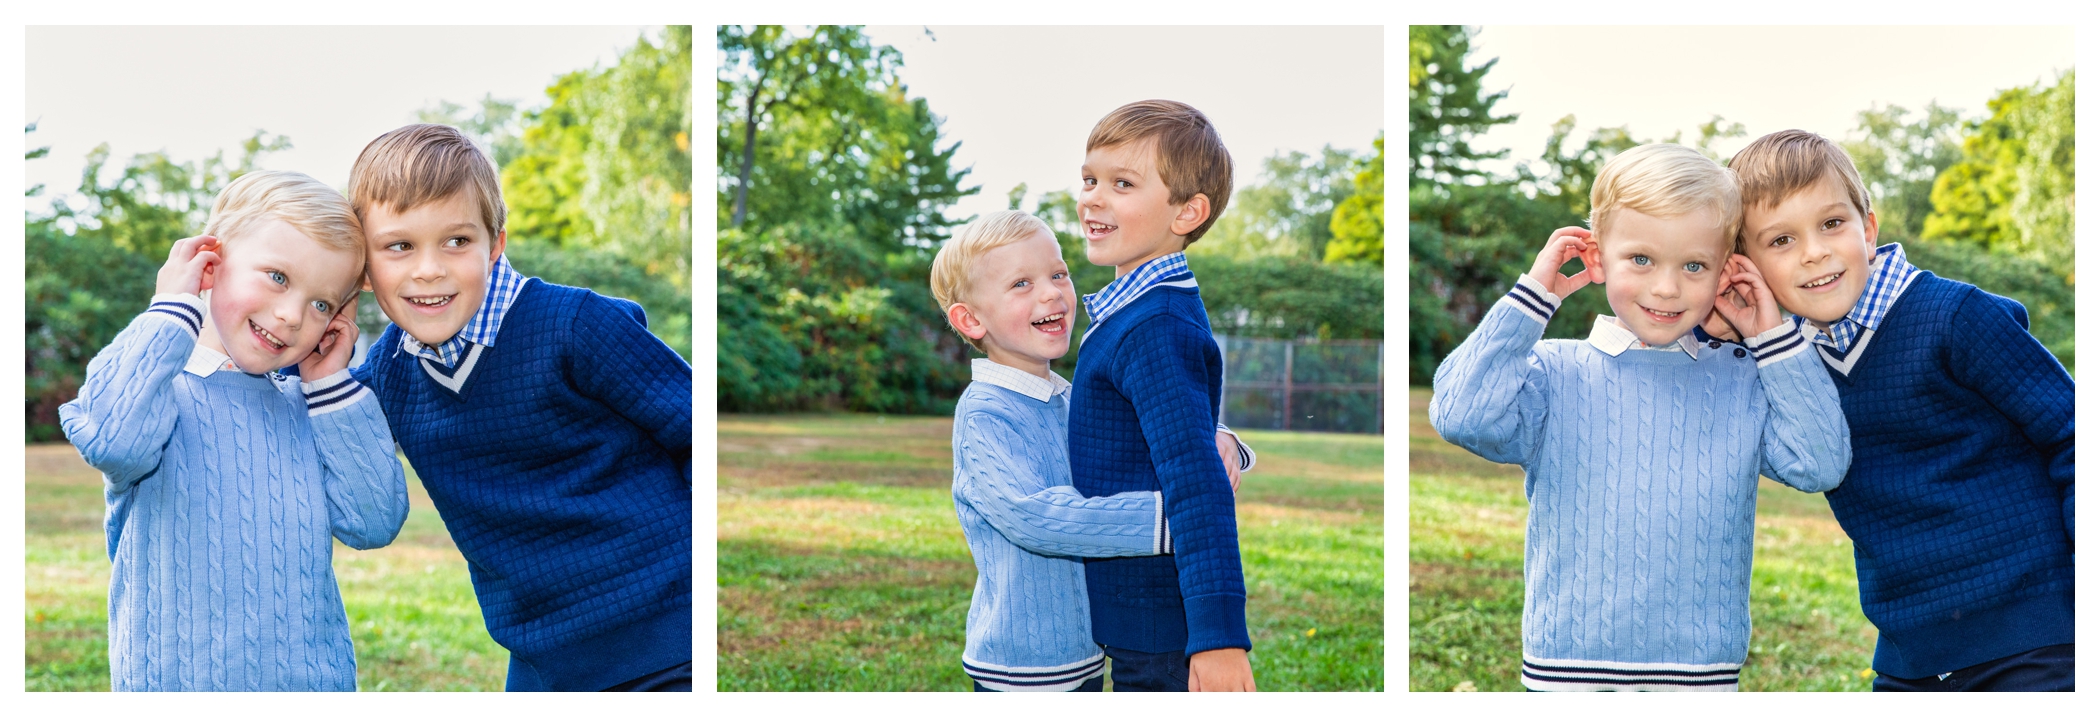 two boys playing games in oakville park in family photo shoot